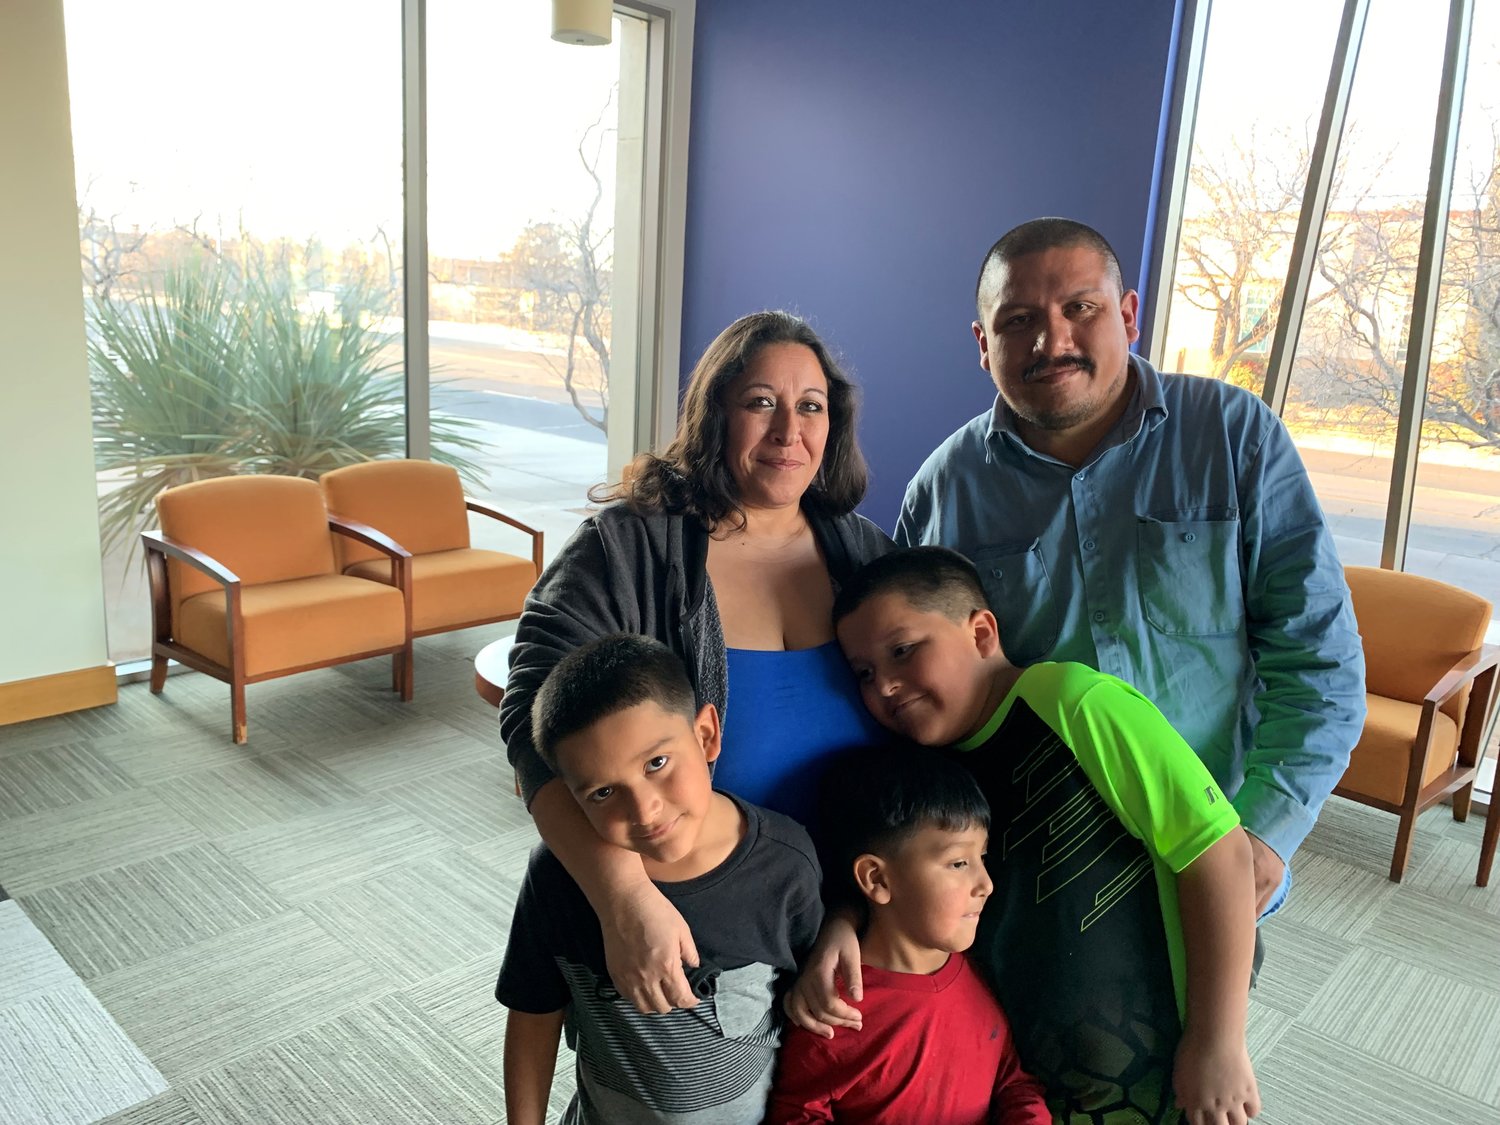 Veronica Valencia and Jose Herrera stand with their sons, Javier, Jonathan and Jose Jr. The couple, who has been dating for almost 12 years and engaged for five, will be married Sunday, Jan. 30, the winners of the free “Tie the Knot” contest, part of the Las Cruces Bridal & Special Events Showcase at the Las Cruces Convention Center 11 a.m.-4 p.m.